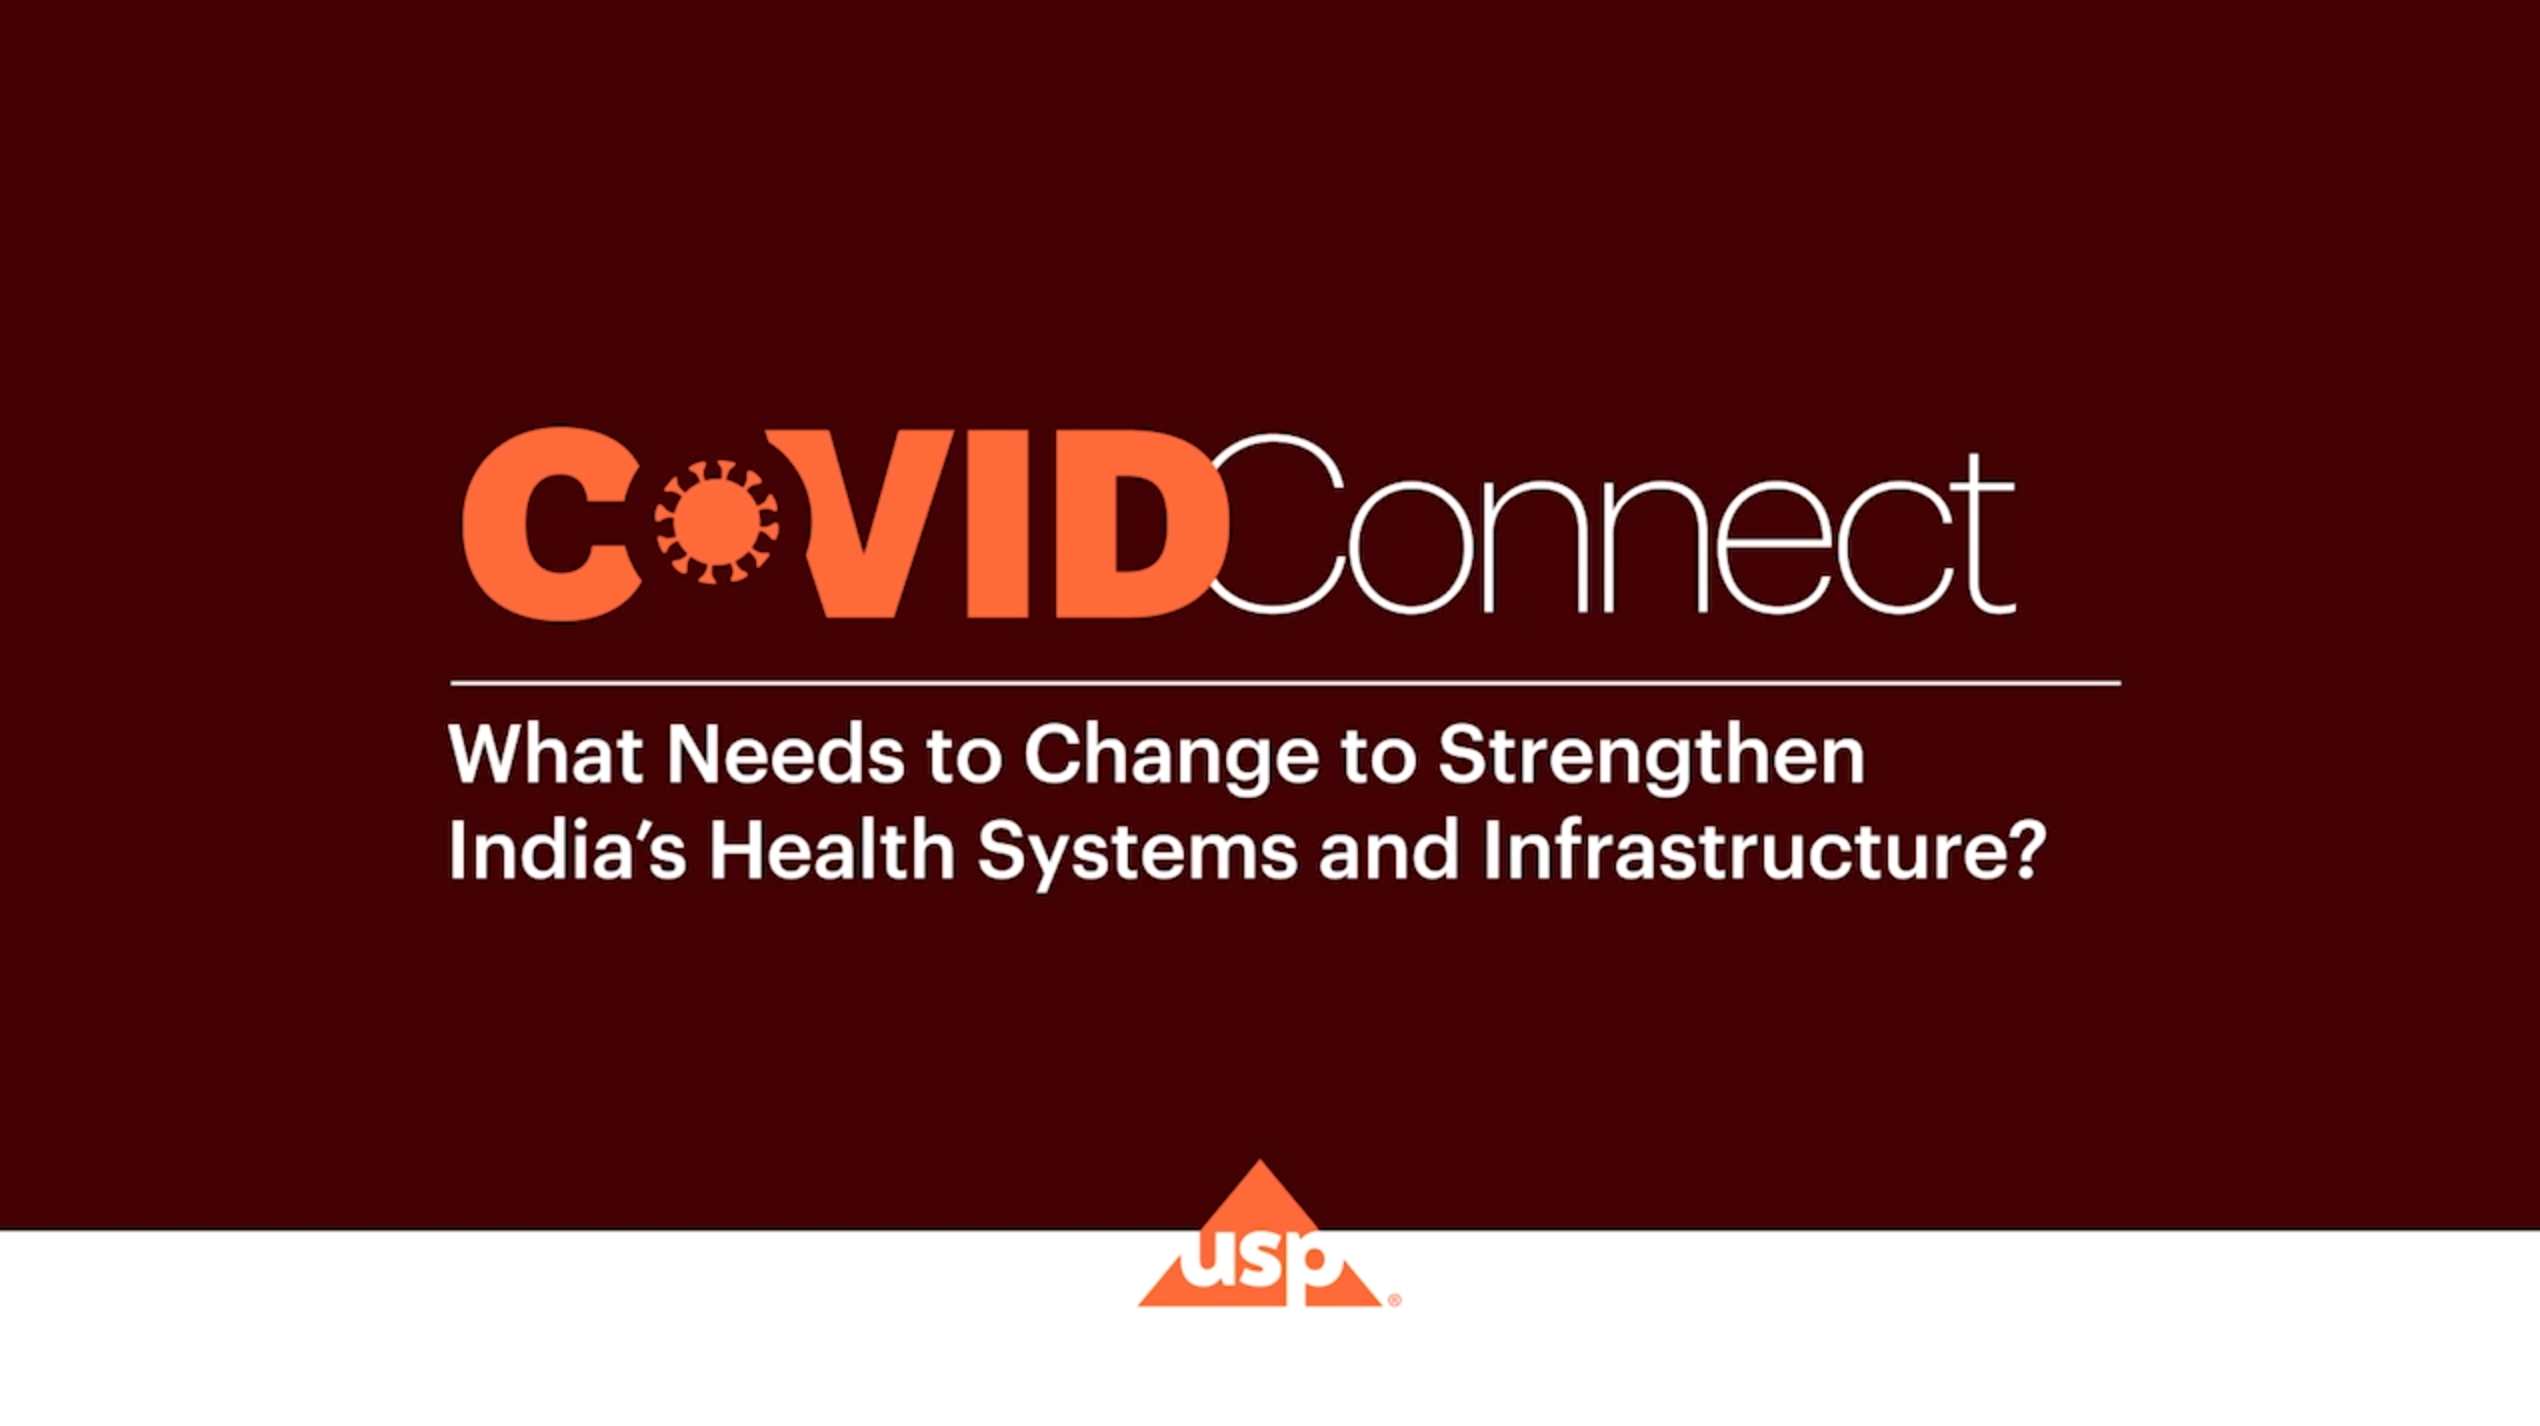 USP COVID-Connect with Dr. Krishna Reddy |What needs to change to strengthen India’s health systems and infrastructure?